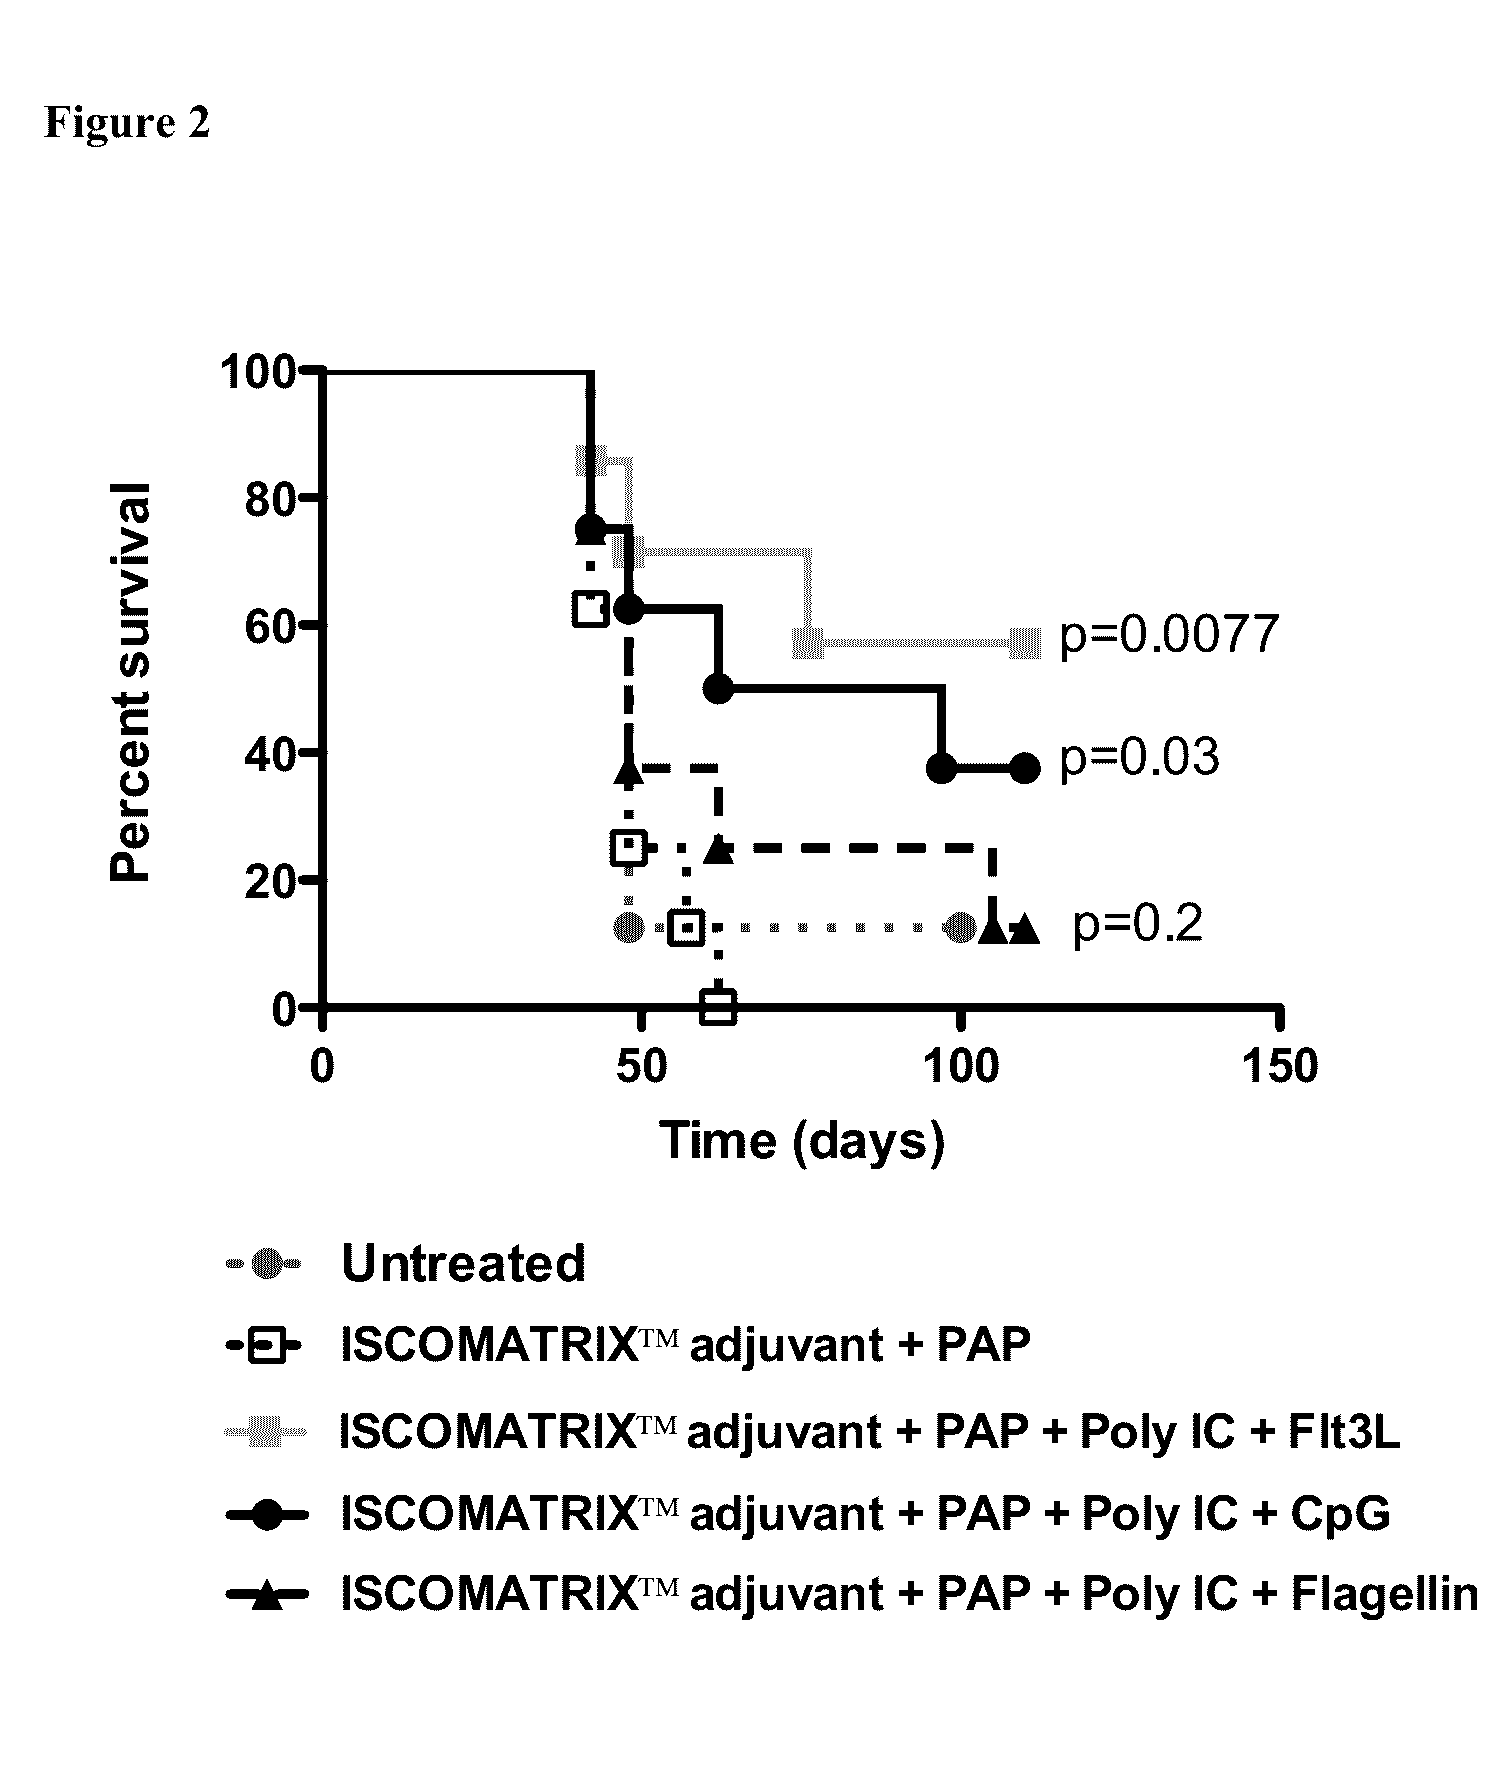 Anti-tumor compositions and uses thereof